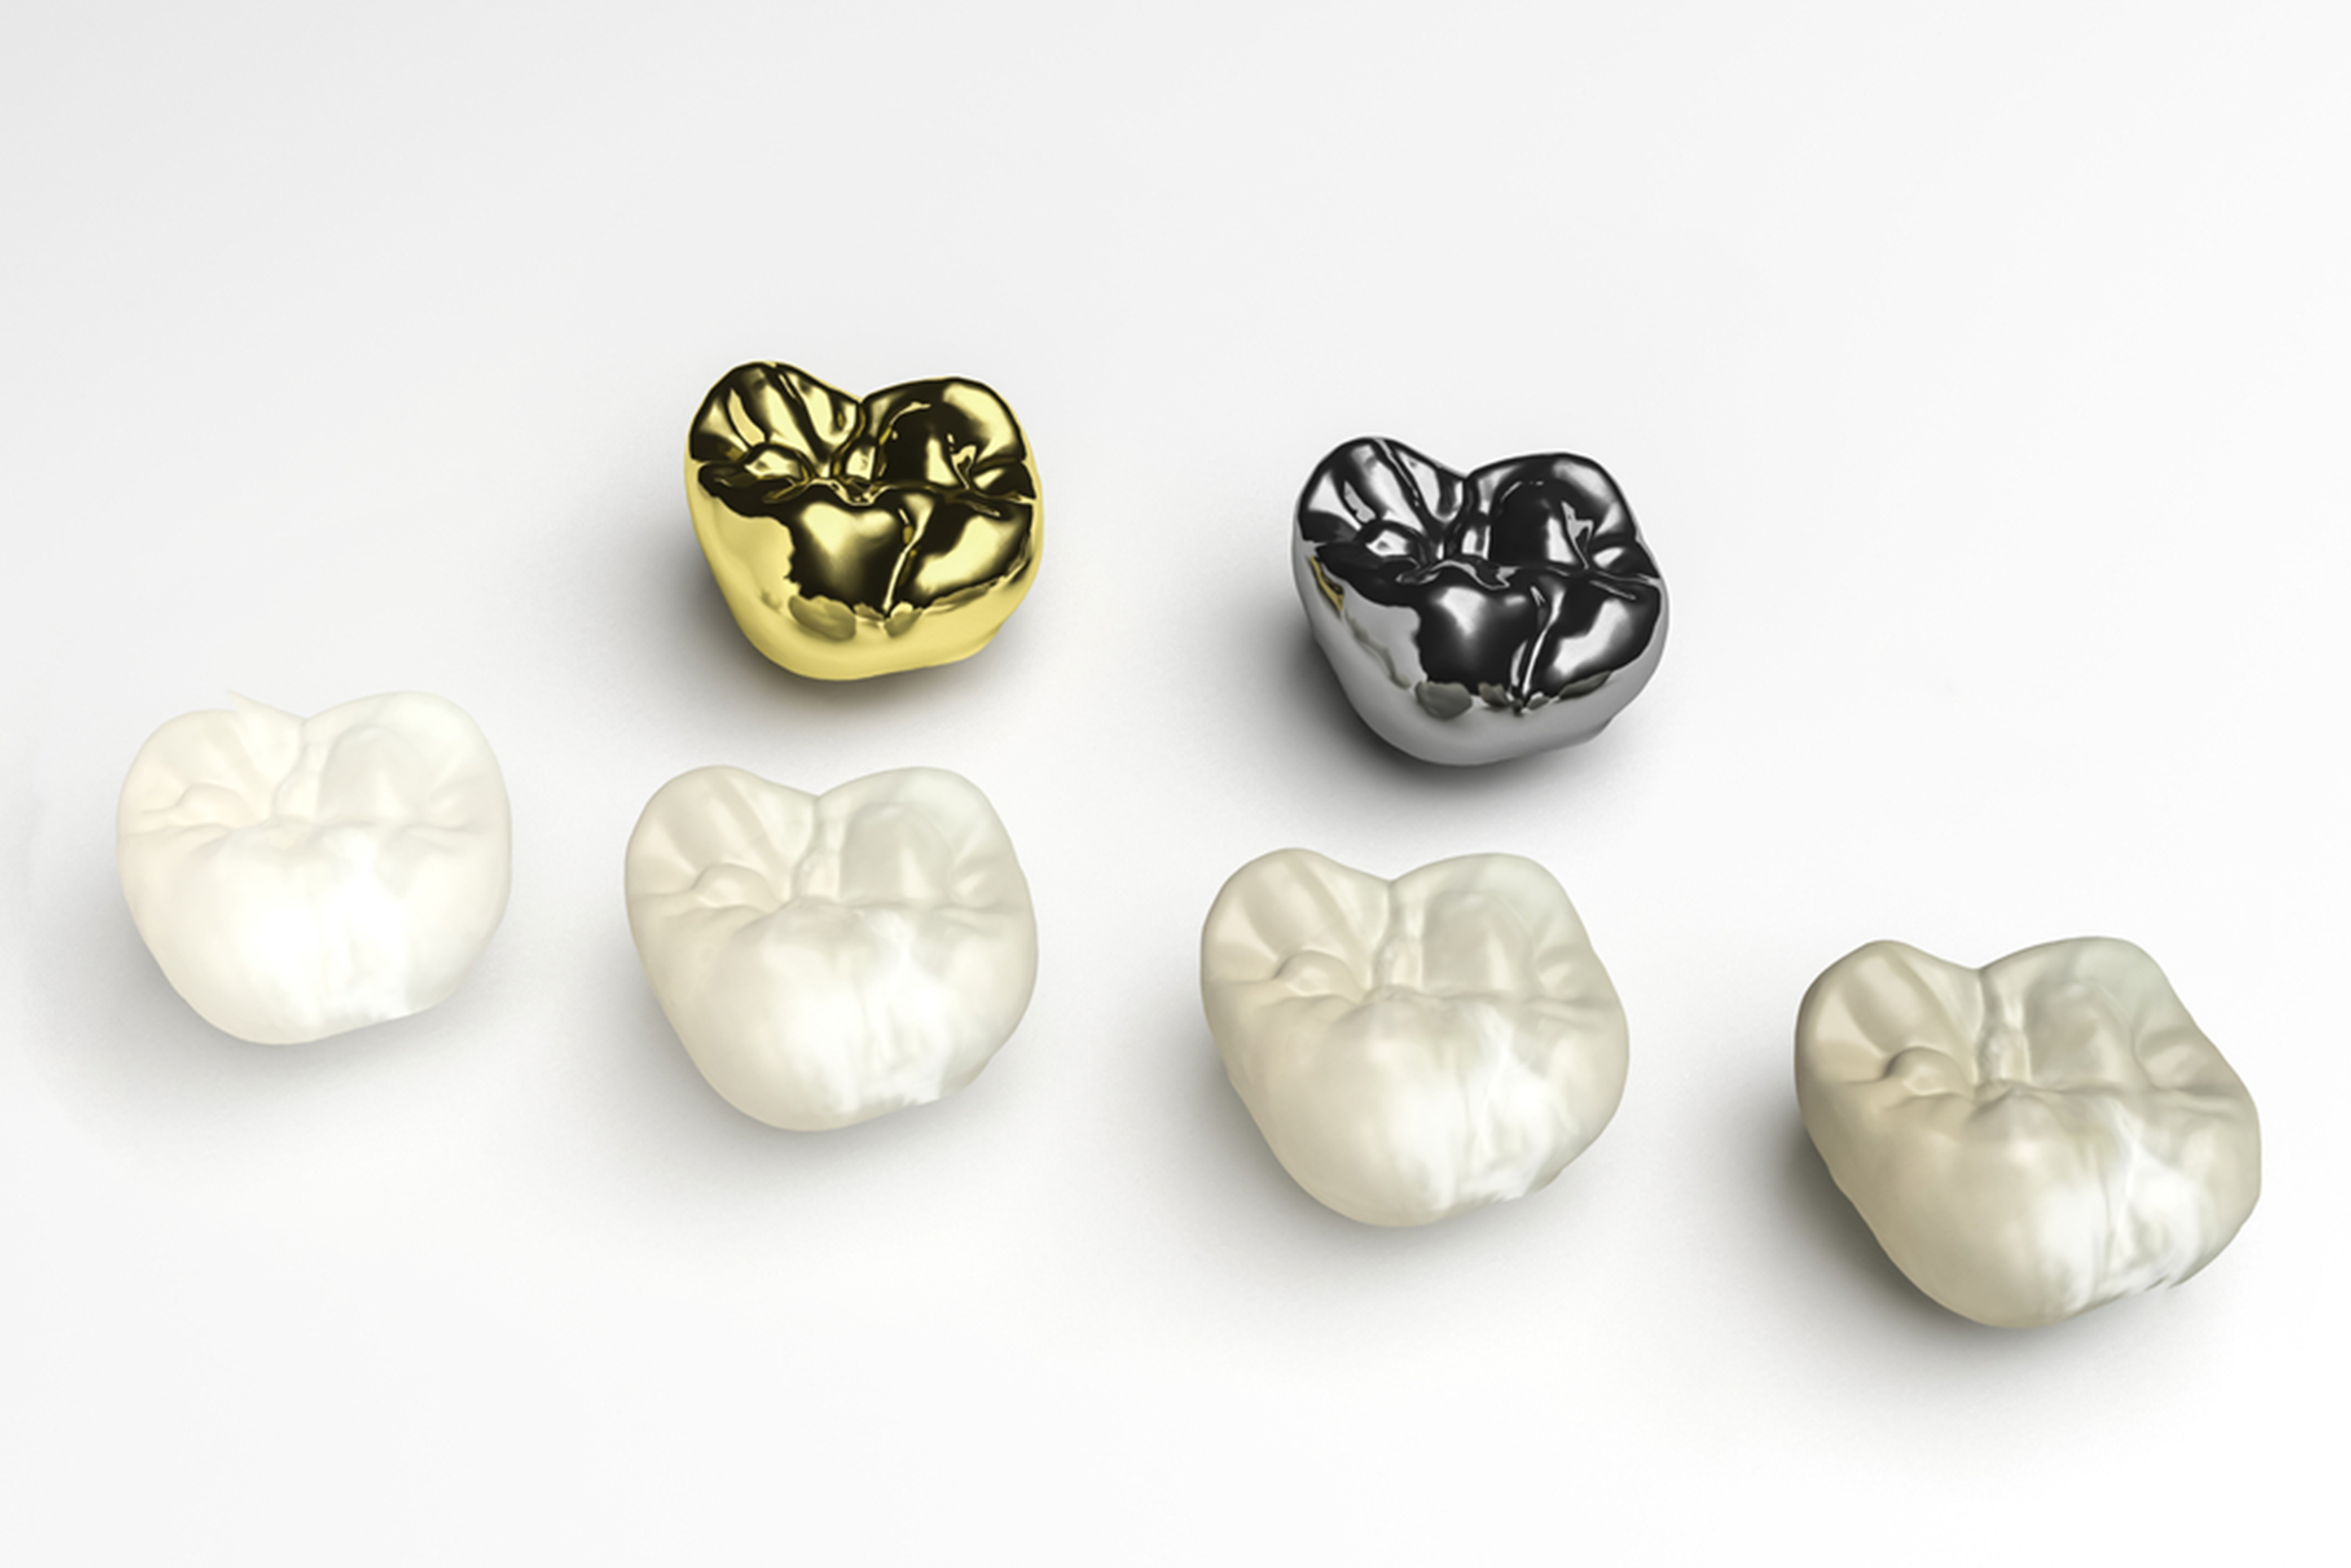 dental crown types how do i choose the right material